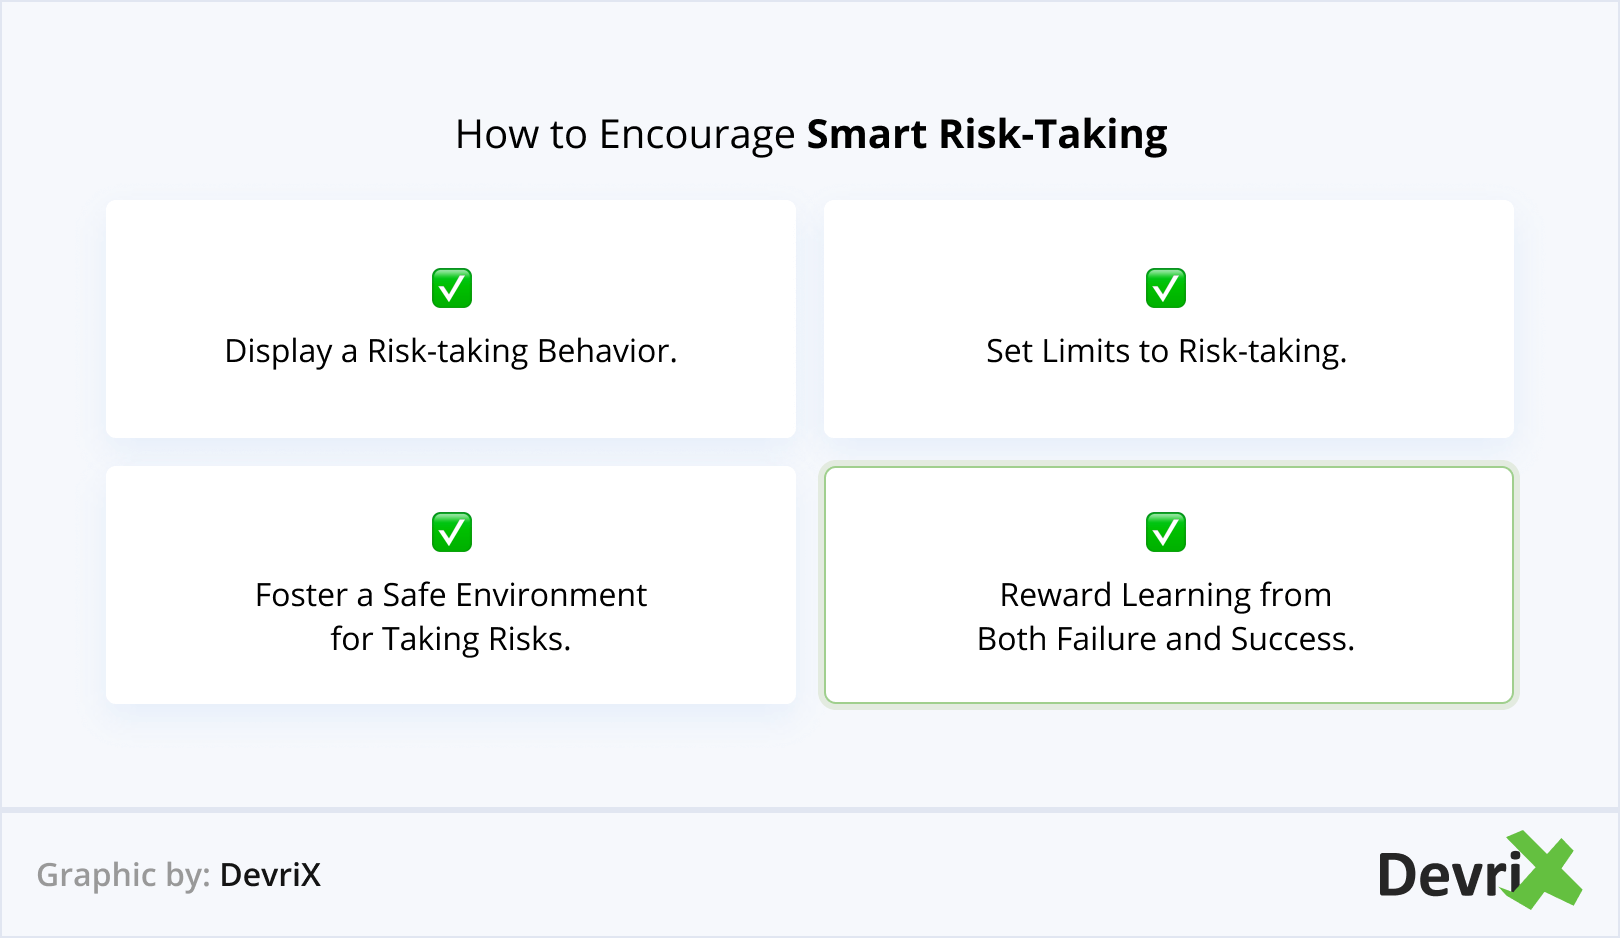 How to Encourage Smart Risk-Taking